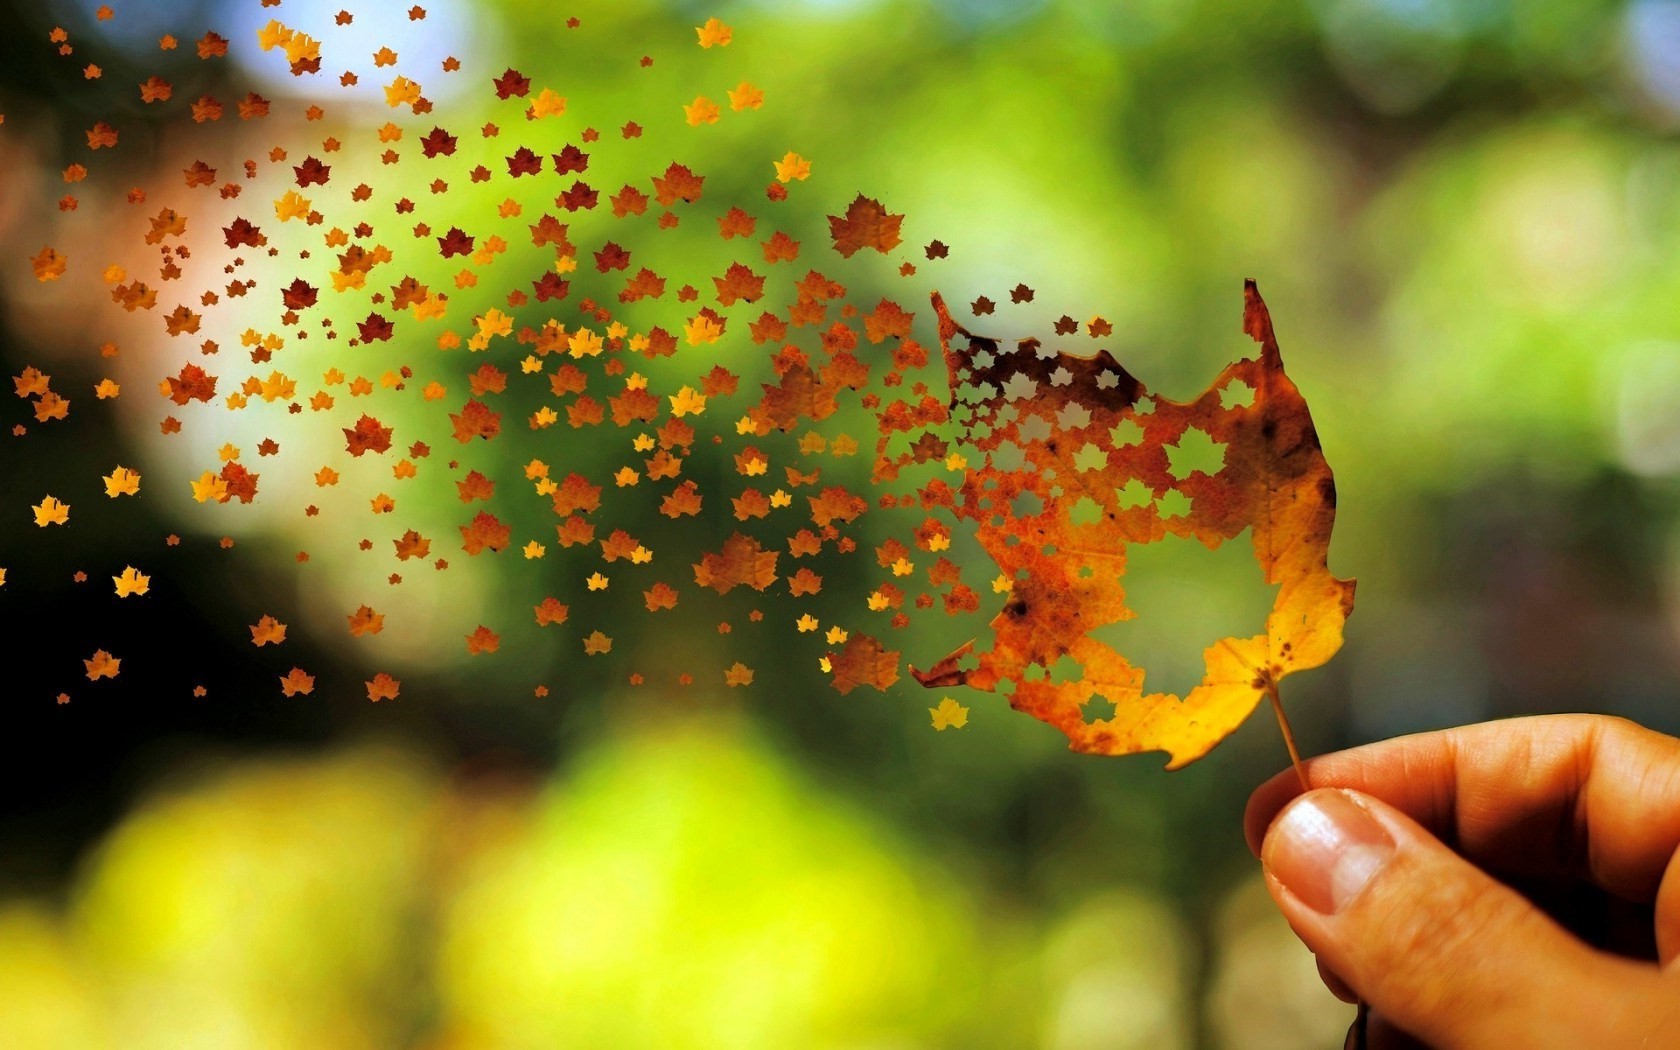 Wallpaper, 1680x1050 px, depth of field, fall, fingers, flying, leaves, nature, photo manipulation, trees 1680x1050